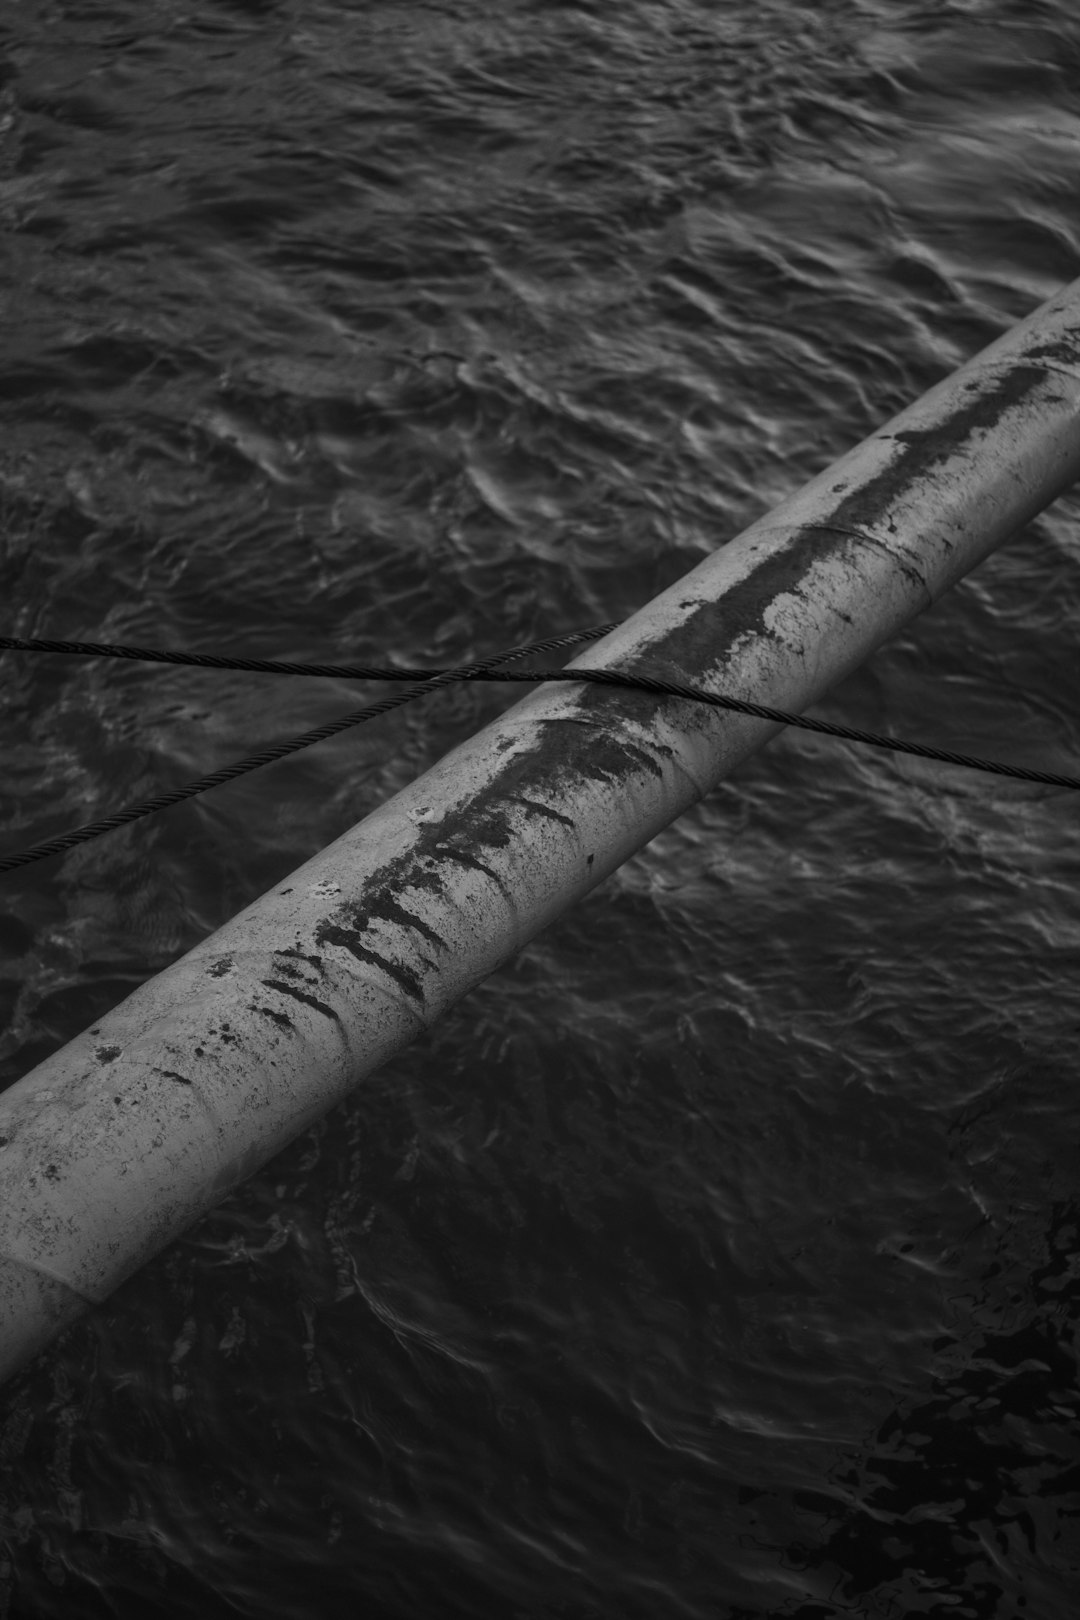 gray scale photo of a wooden stick